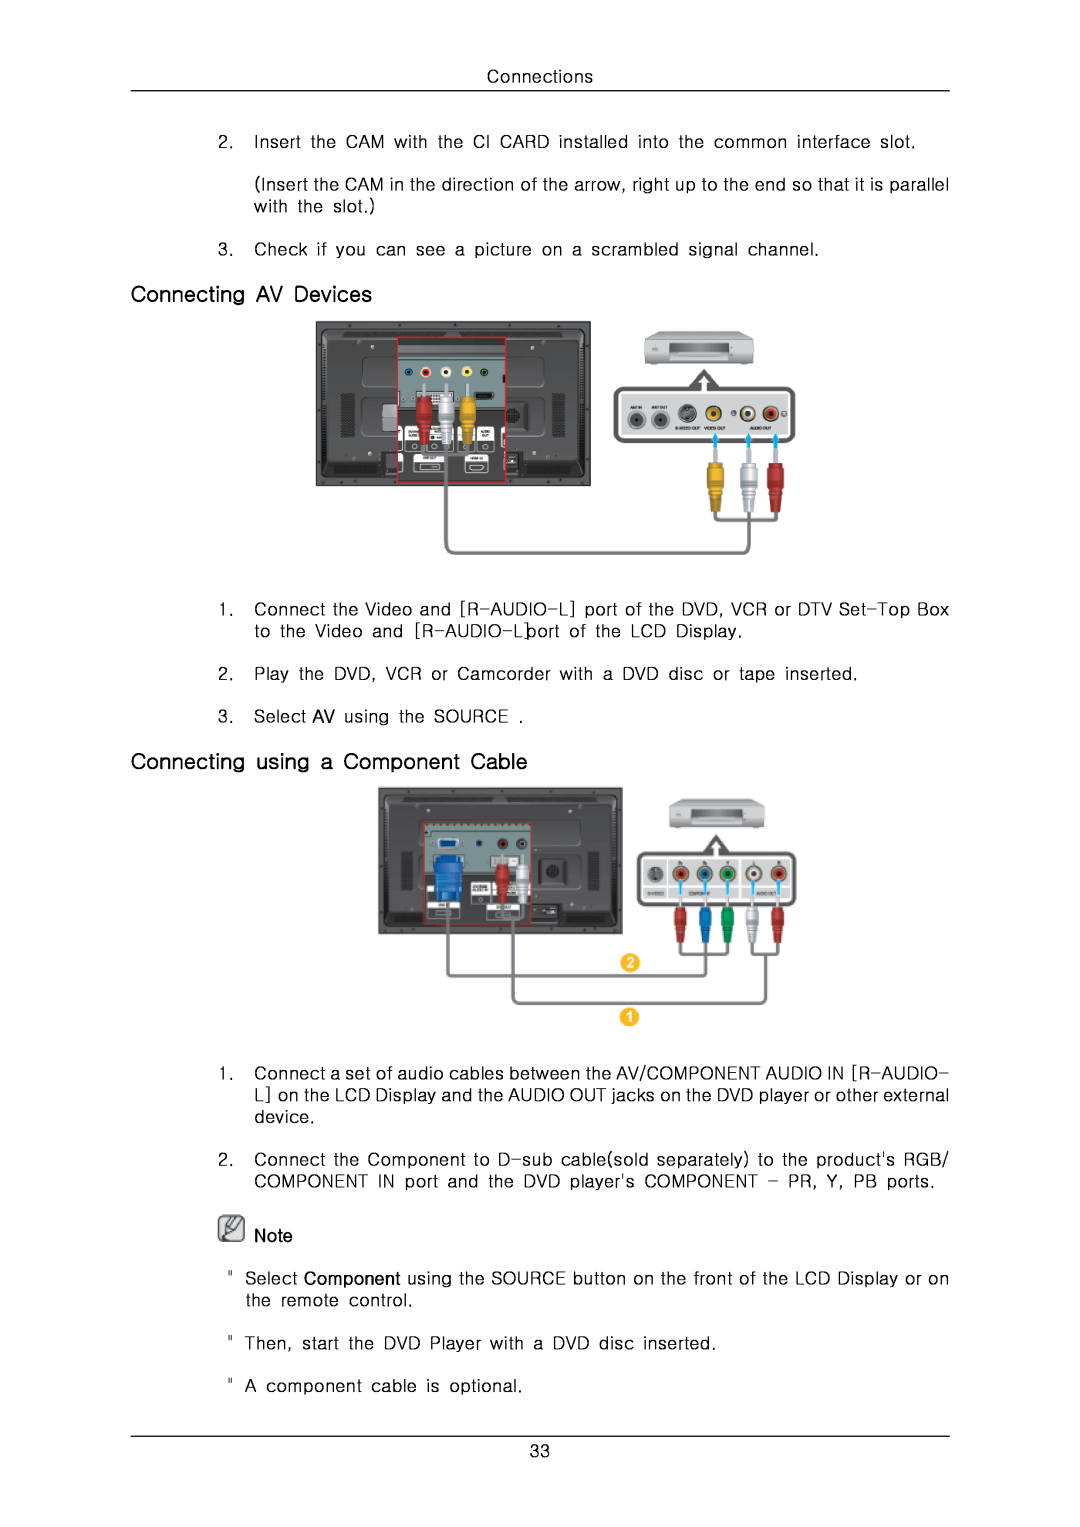 Samsung 460CXN-2, 400CXN-2, 400CX-2, 460CX-2 quick start Connecting AV Devices, Connecting using a Component Cable 